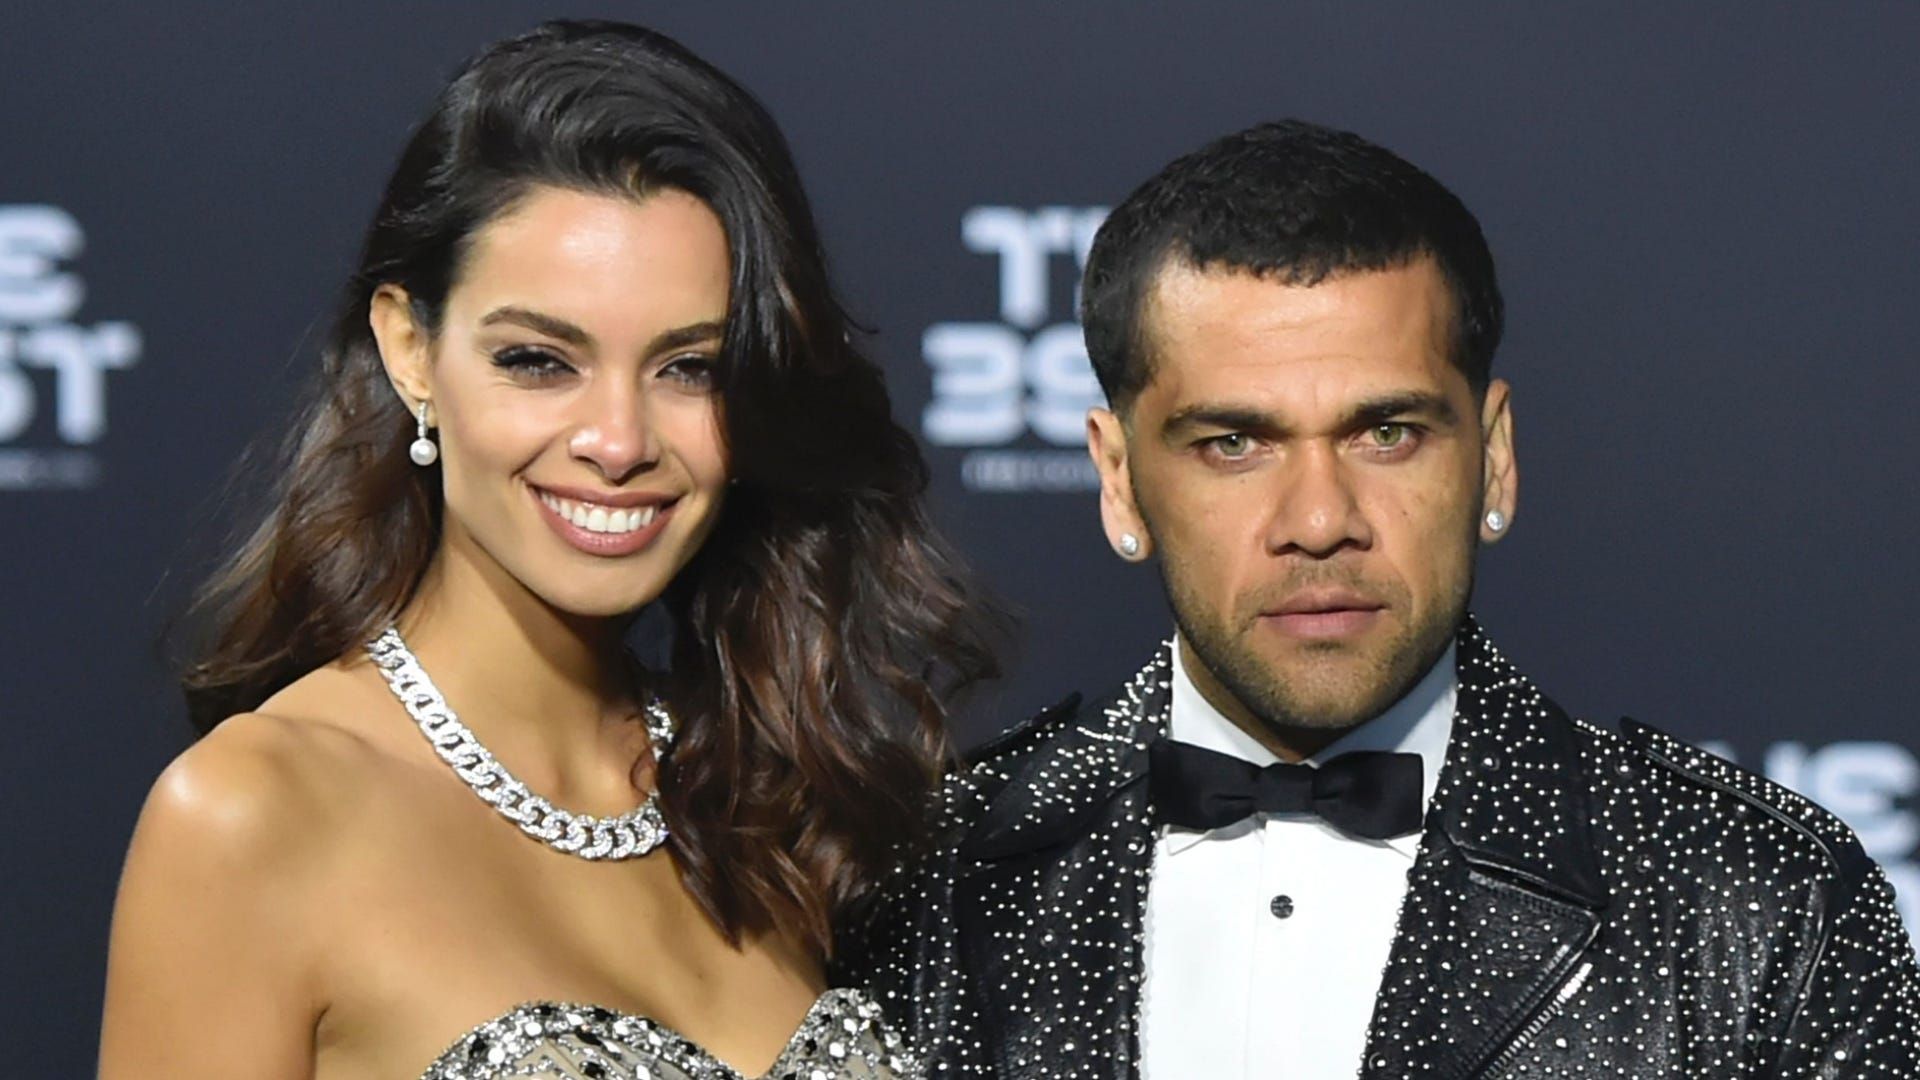 Dani Alves appears to reconcile with wife Joana Sanz in spite of rape conviction